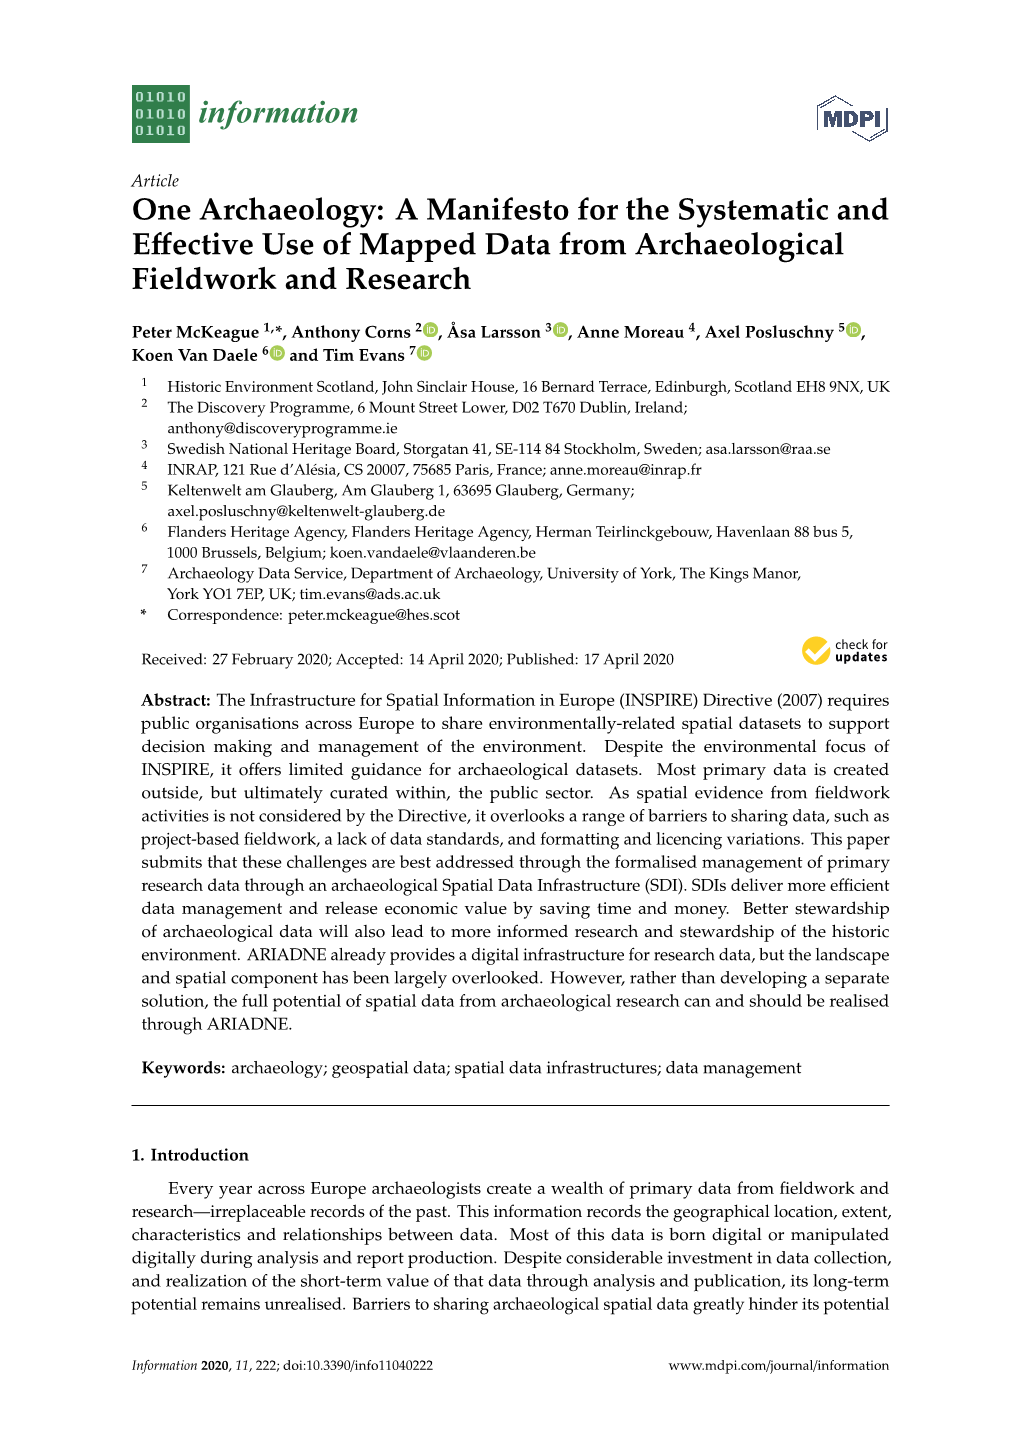 One Archaeology: a Manifesto for the Systematic and Eﬀective Use of Mapped Data from Archaeological Fieldwork and Research